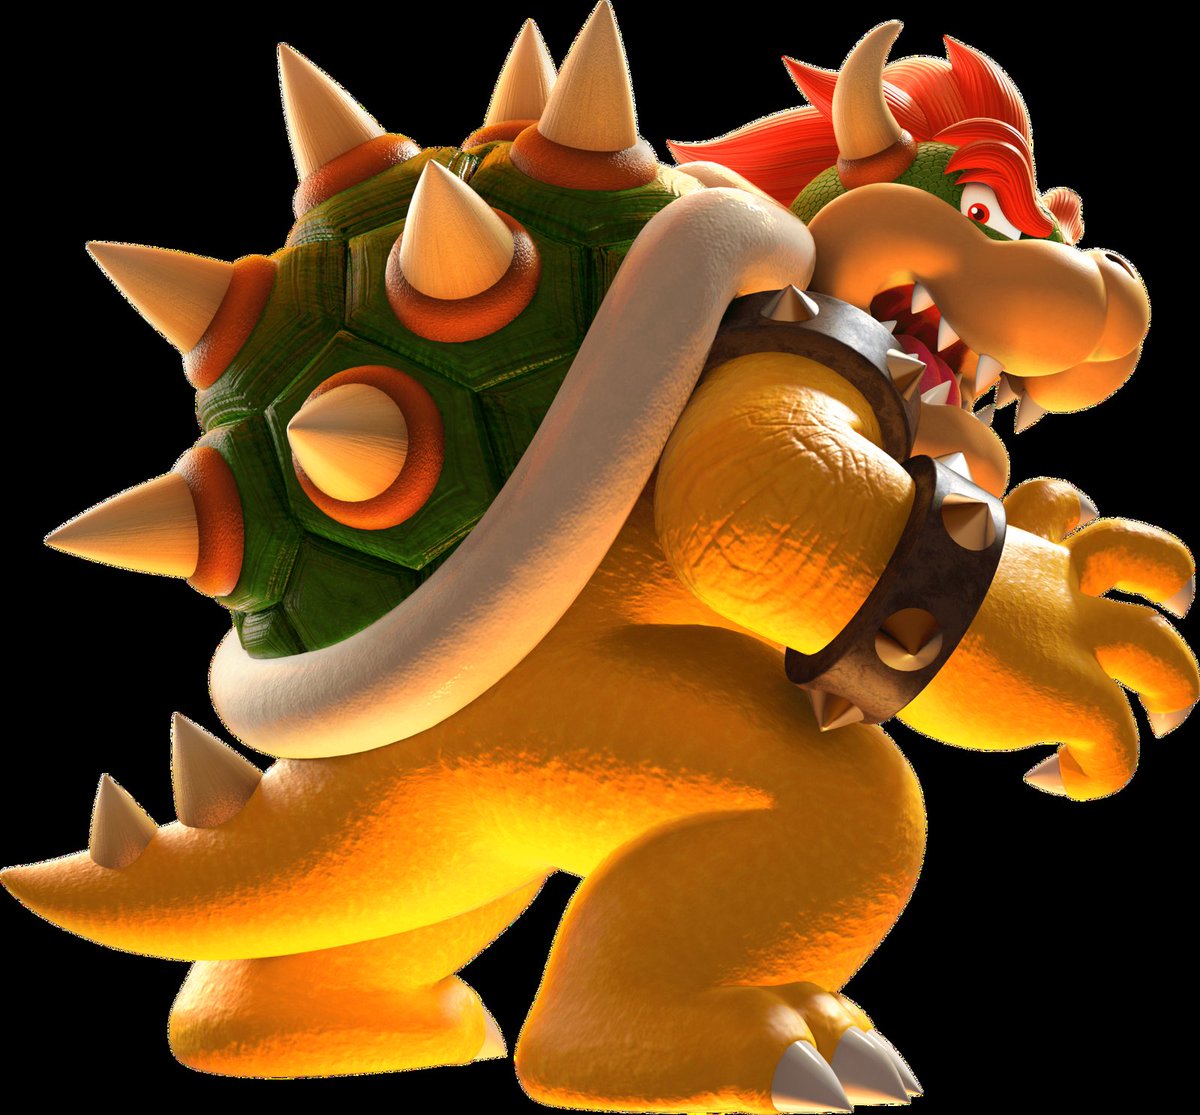 If Bowser is your comfort character, click here!

(May contain spoilers <3)

[A thread 🧵]